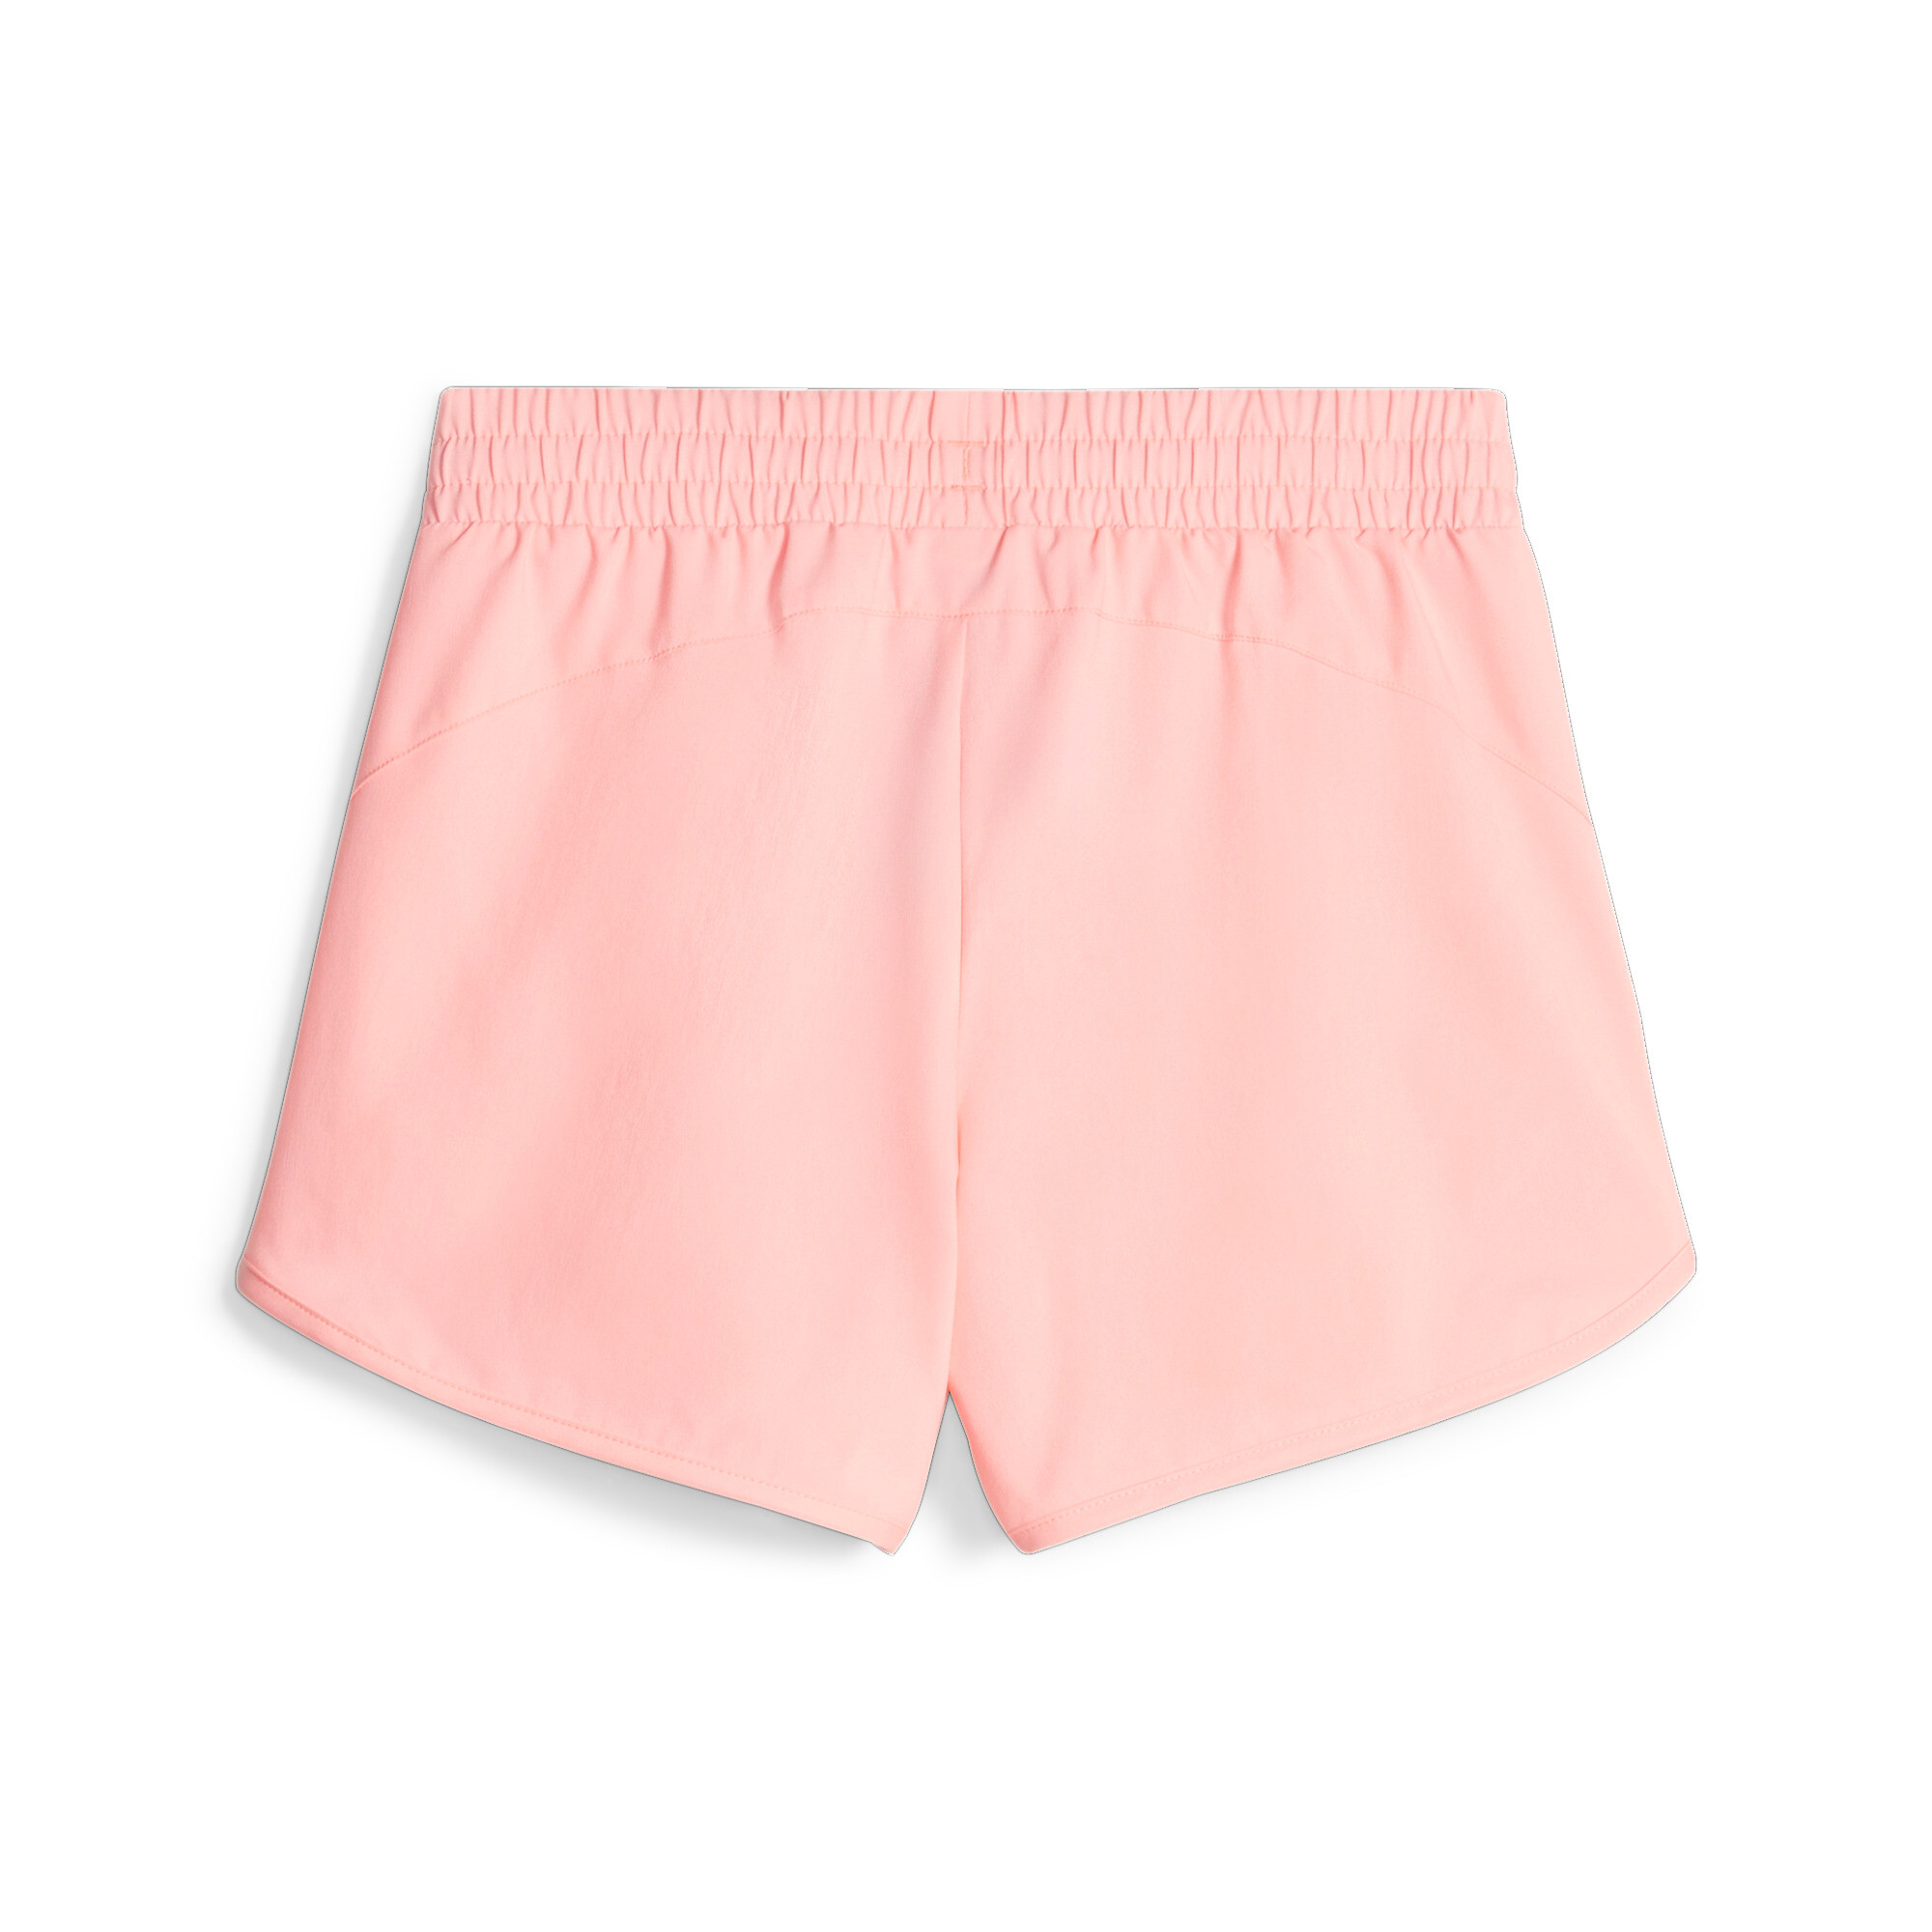 Women's Puma Active Youth Shorts, Pink, Size 5-6Y, Clothing